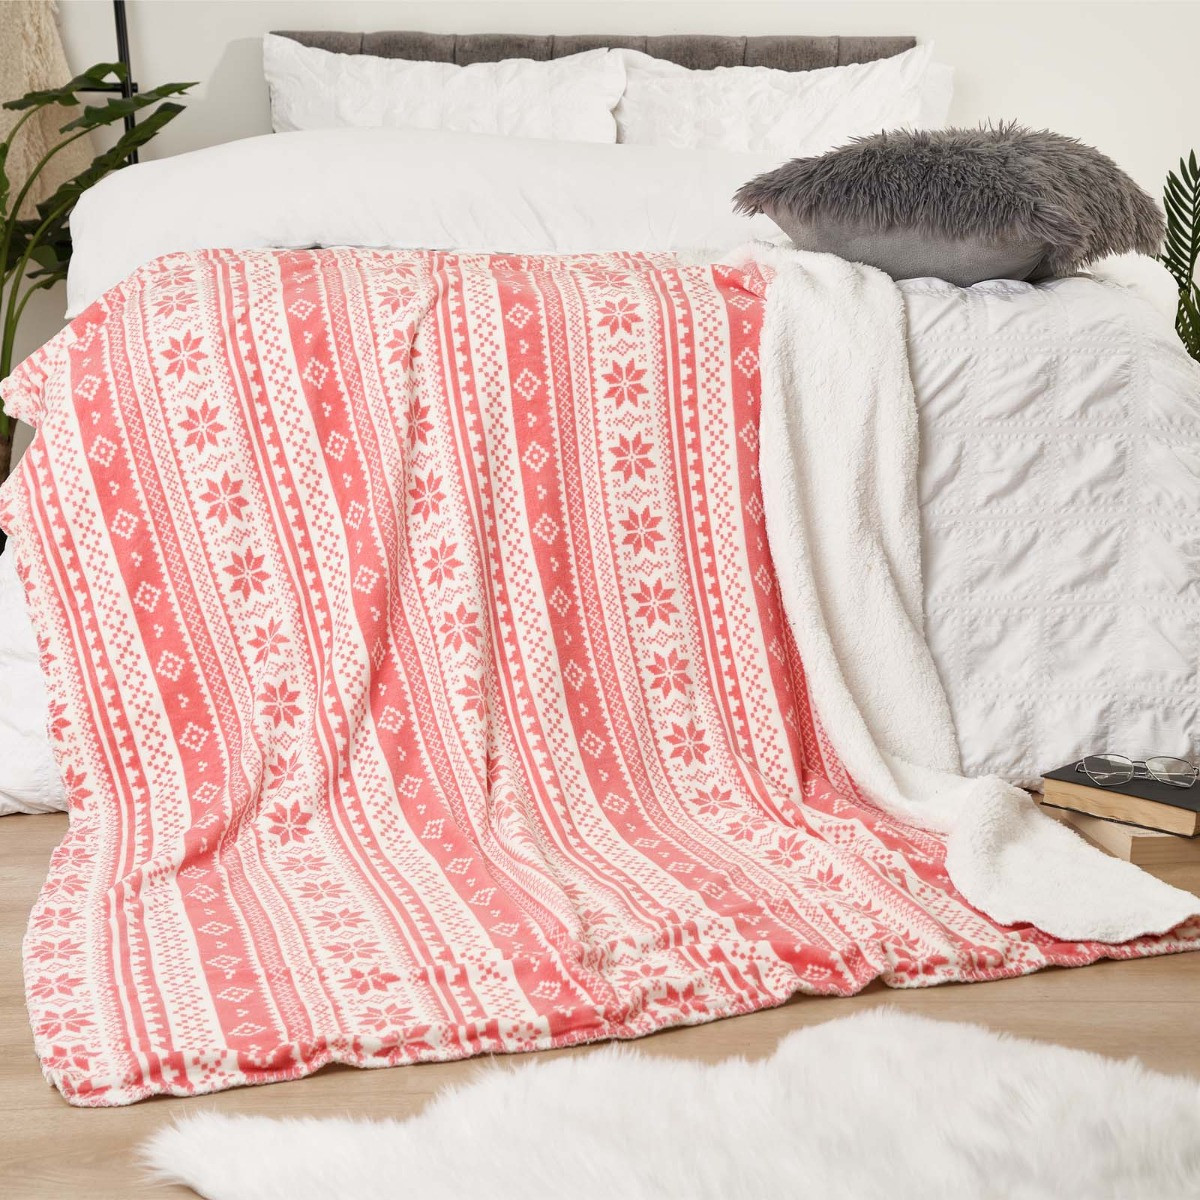 Dreamscene by OHS Nordic Print Sherpa Throw Blanket, Blush Pink - 60 x 70 inches>